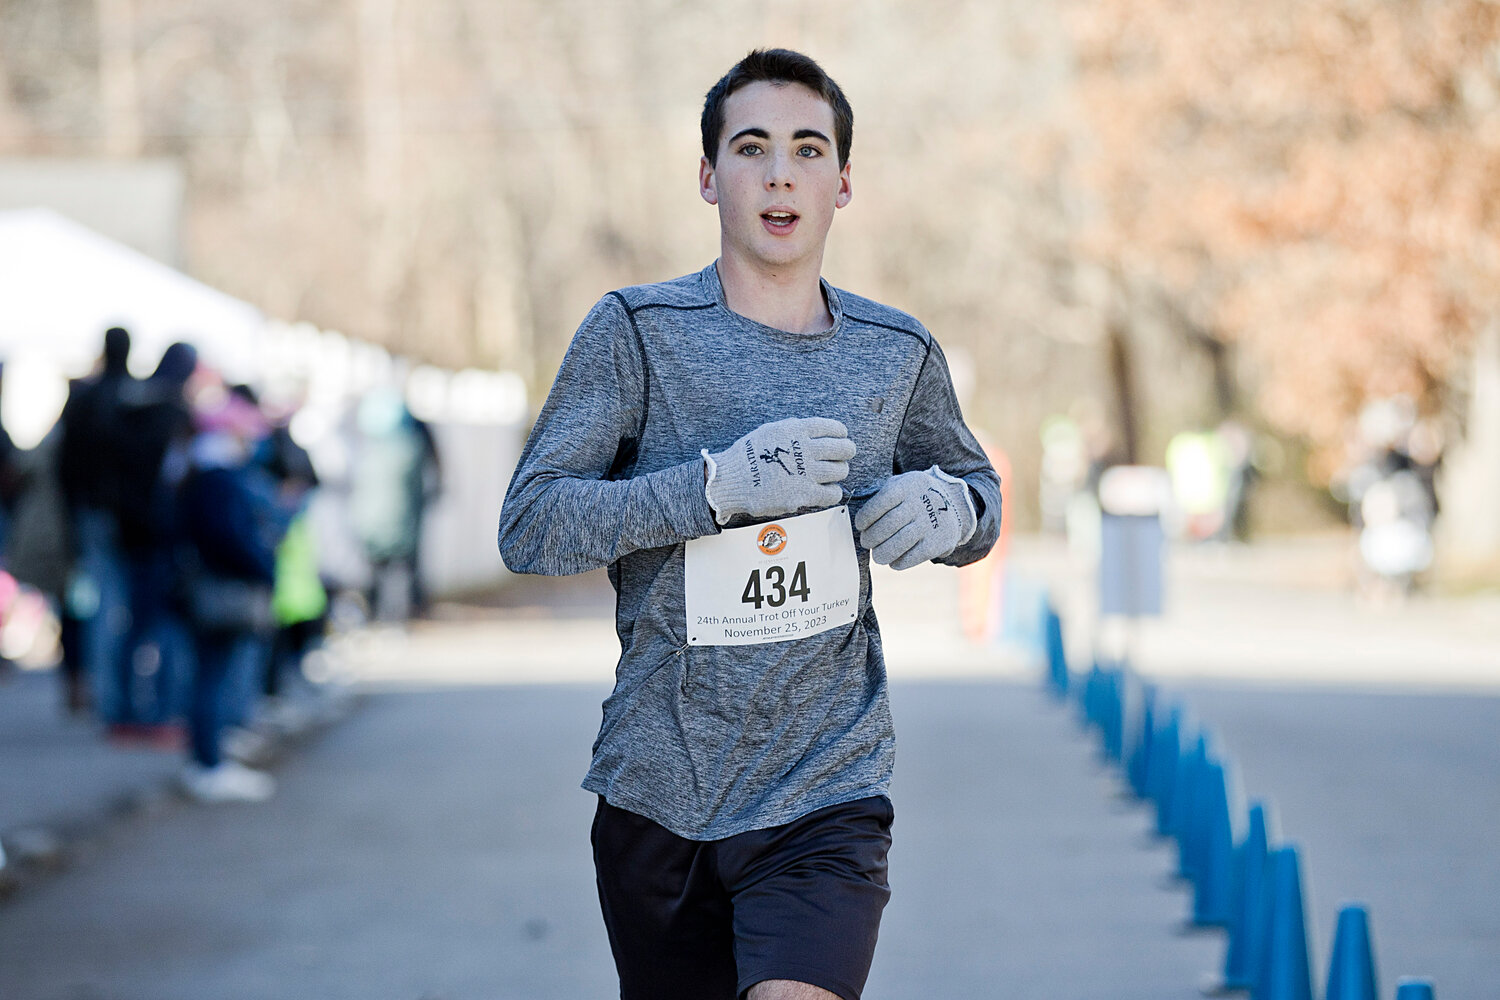 Barrington’s Connor Curran keeps his pace as he approaches the finish line of the Trot Off Your Turkey 5K race.